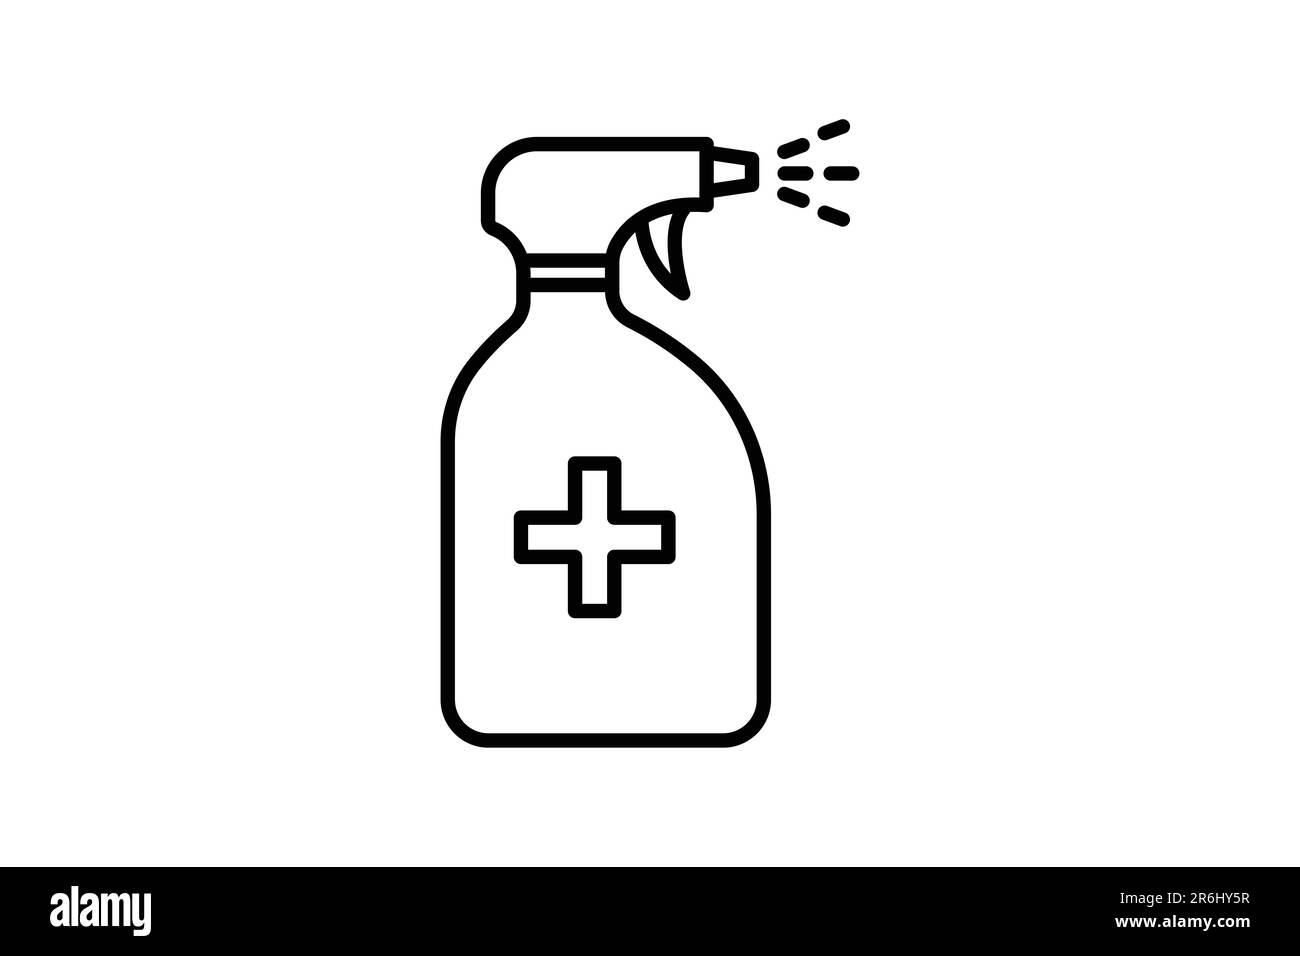 sprayer bottle icon. spray drops. icon related to disinfectant, antiseptic. Line icon style design. Simple vector design editable Stock Vector